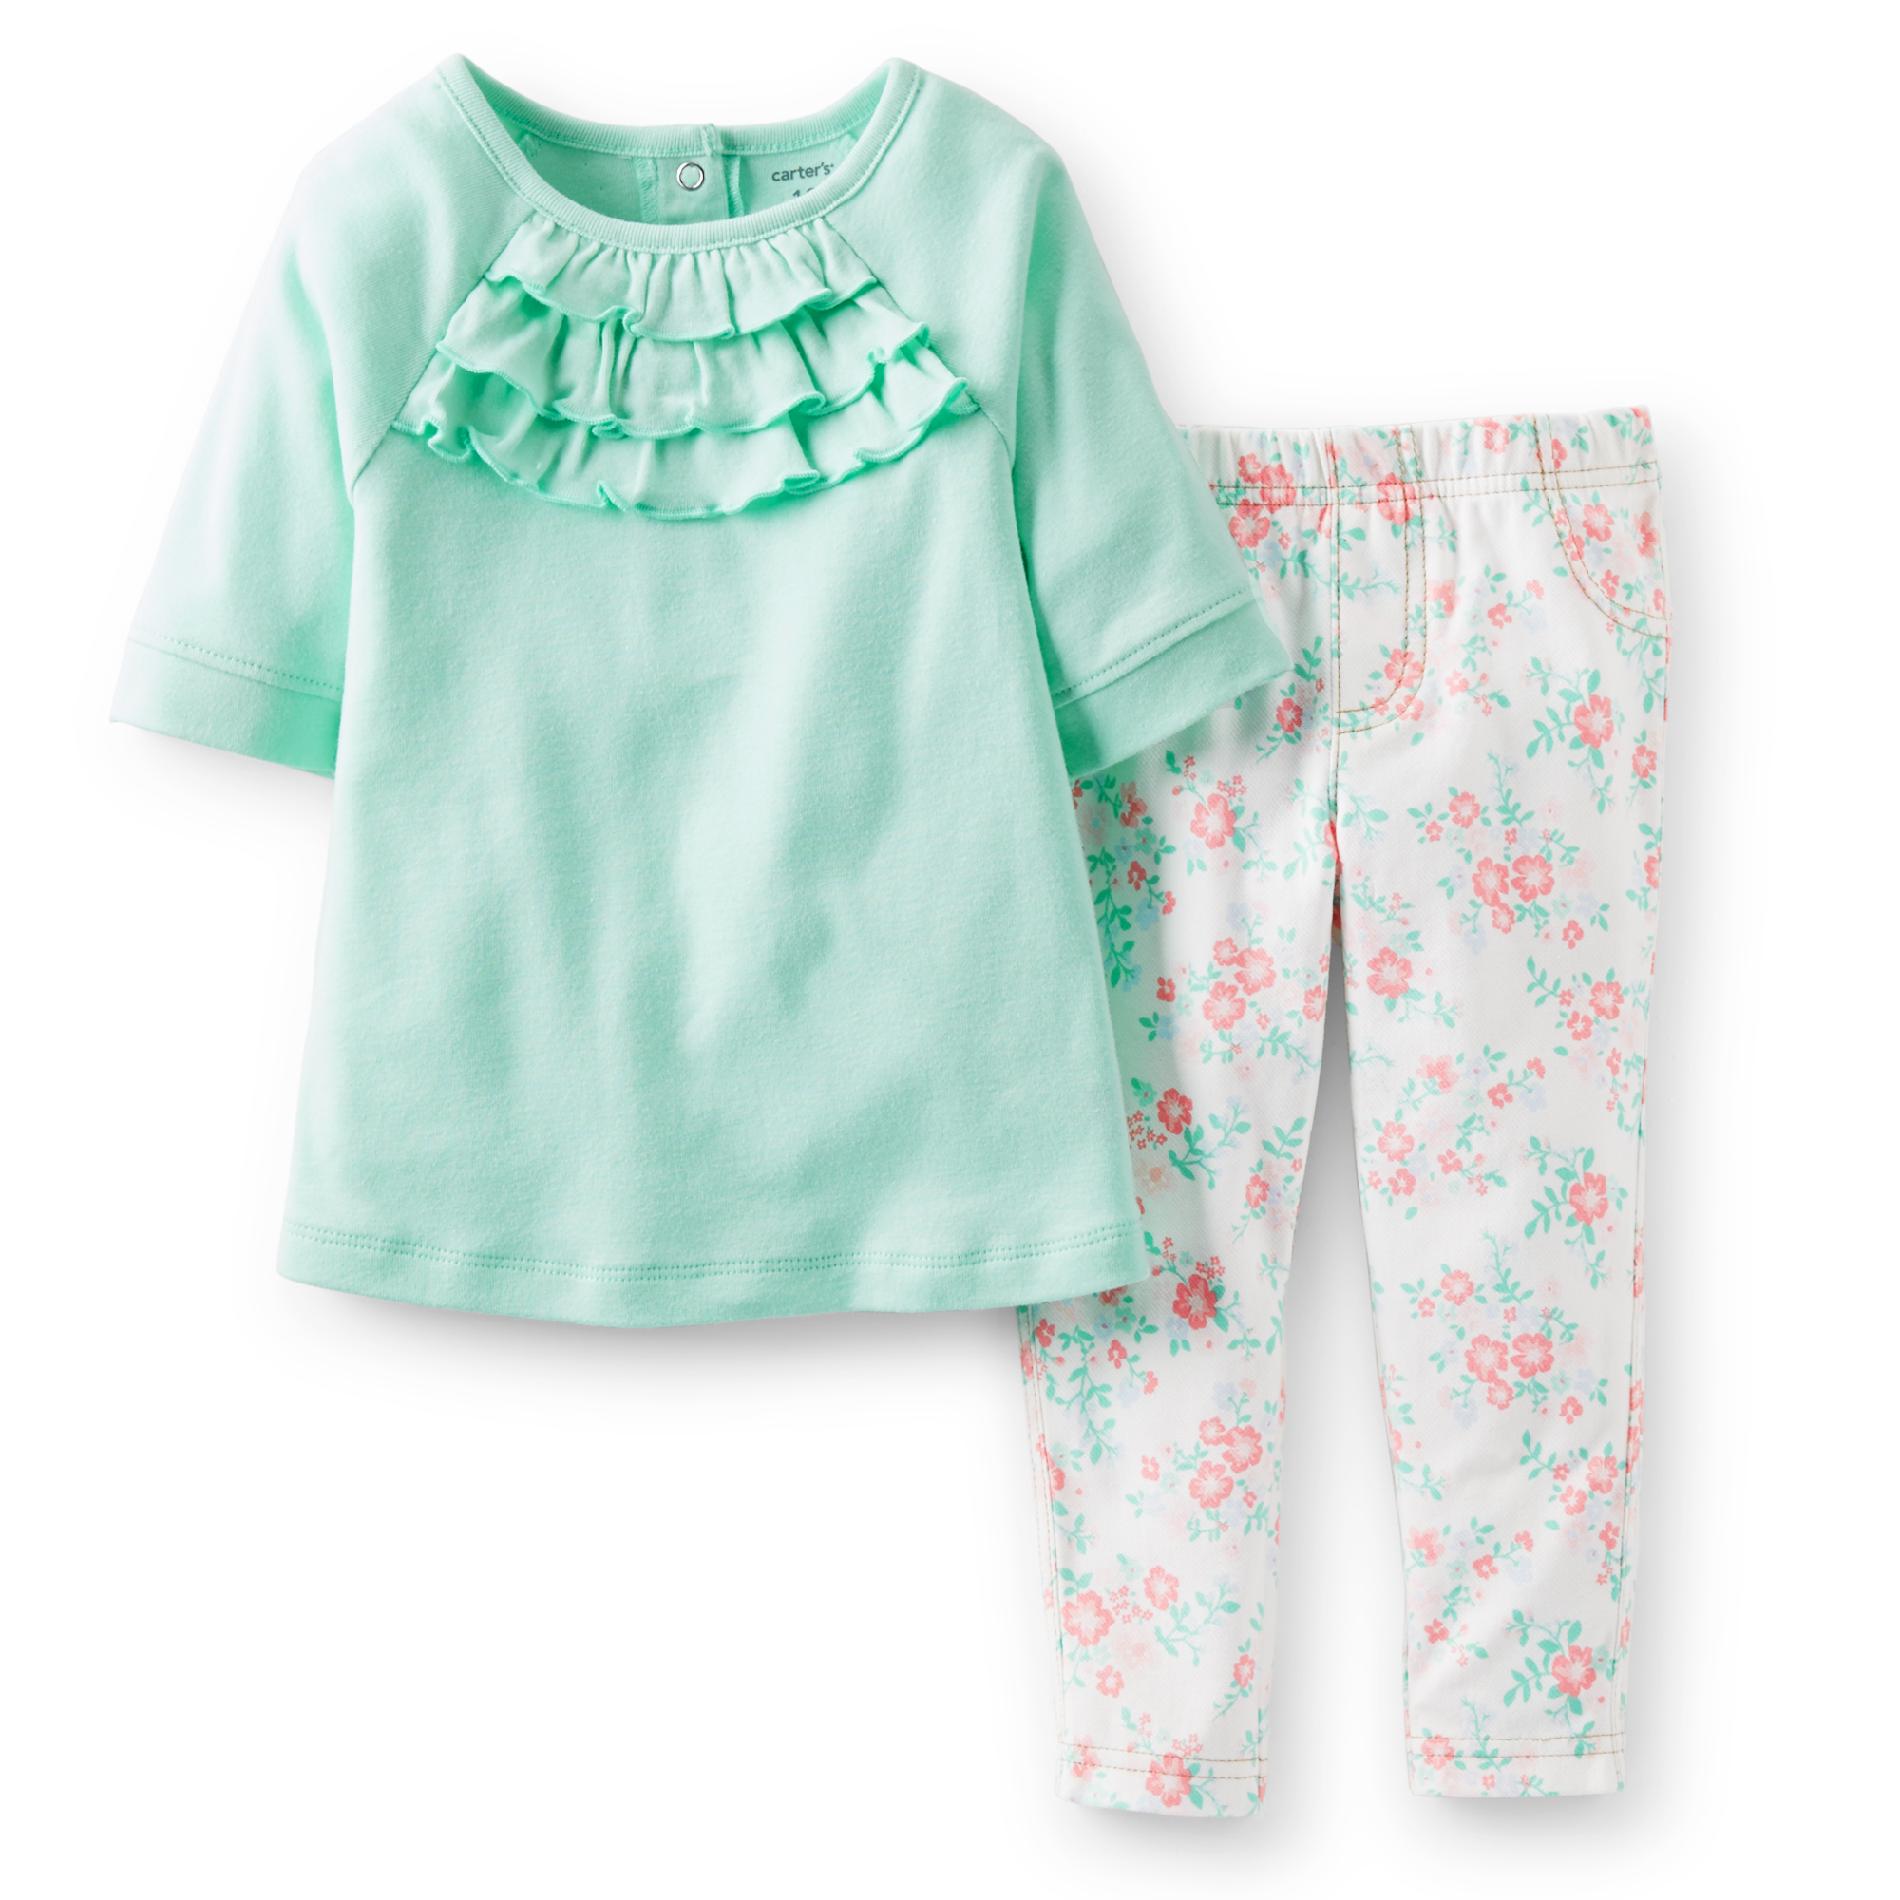 Carter's Newborn  Infant & Toddler Girl's Ruffle Top & Knit Jeggings - Floral